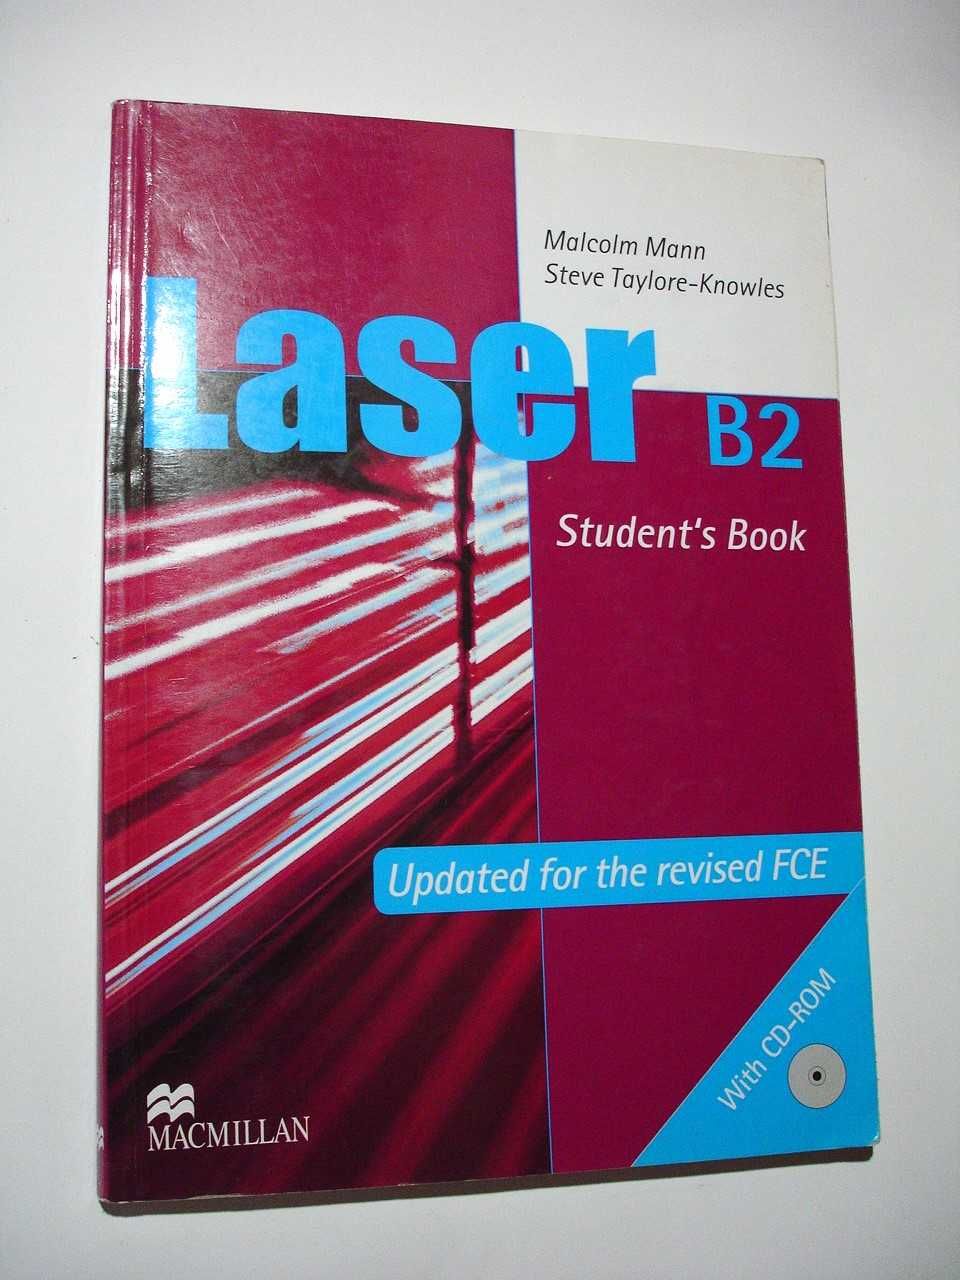 Laser B2 Student's book. Mann, Taylore-Knowles